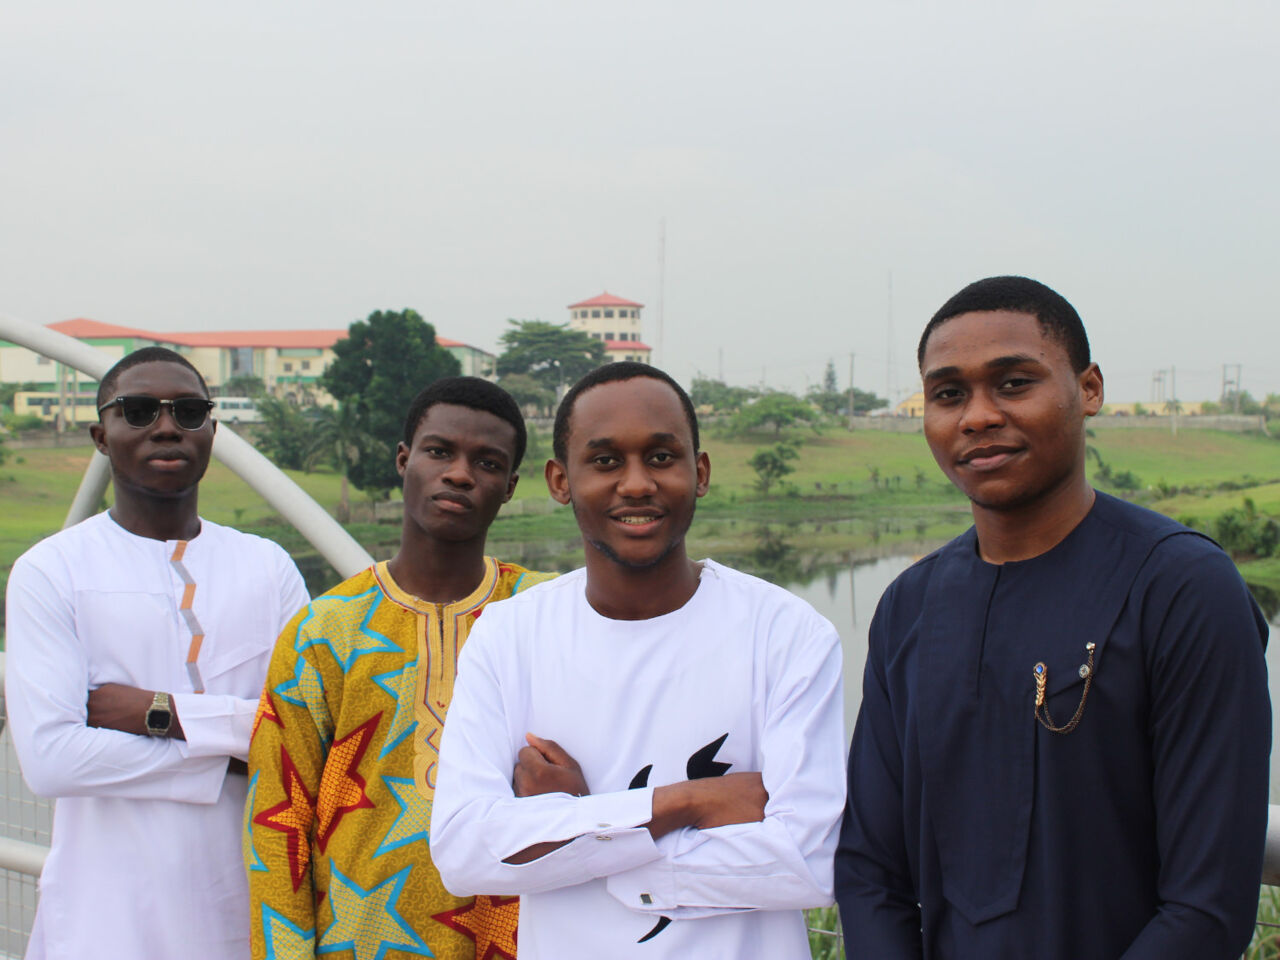 Members of Team Code-In from Nigeria pose for a photograph.
